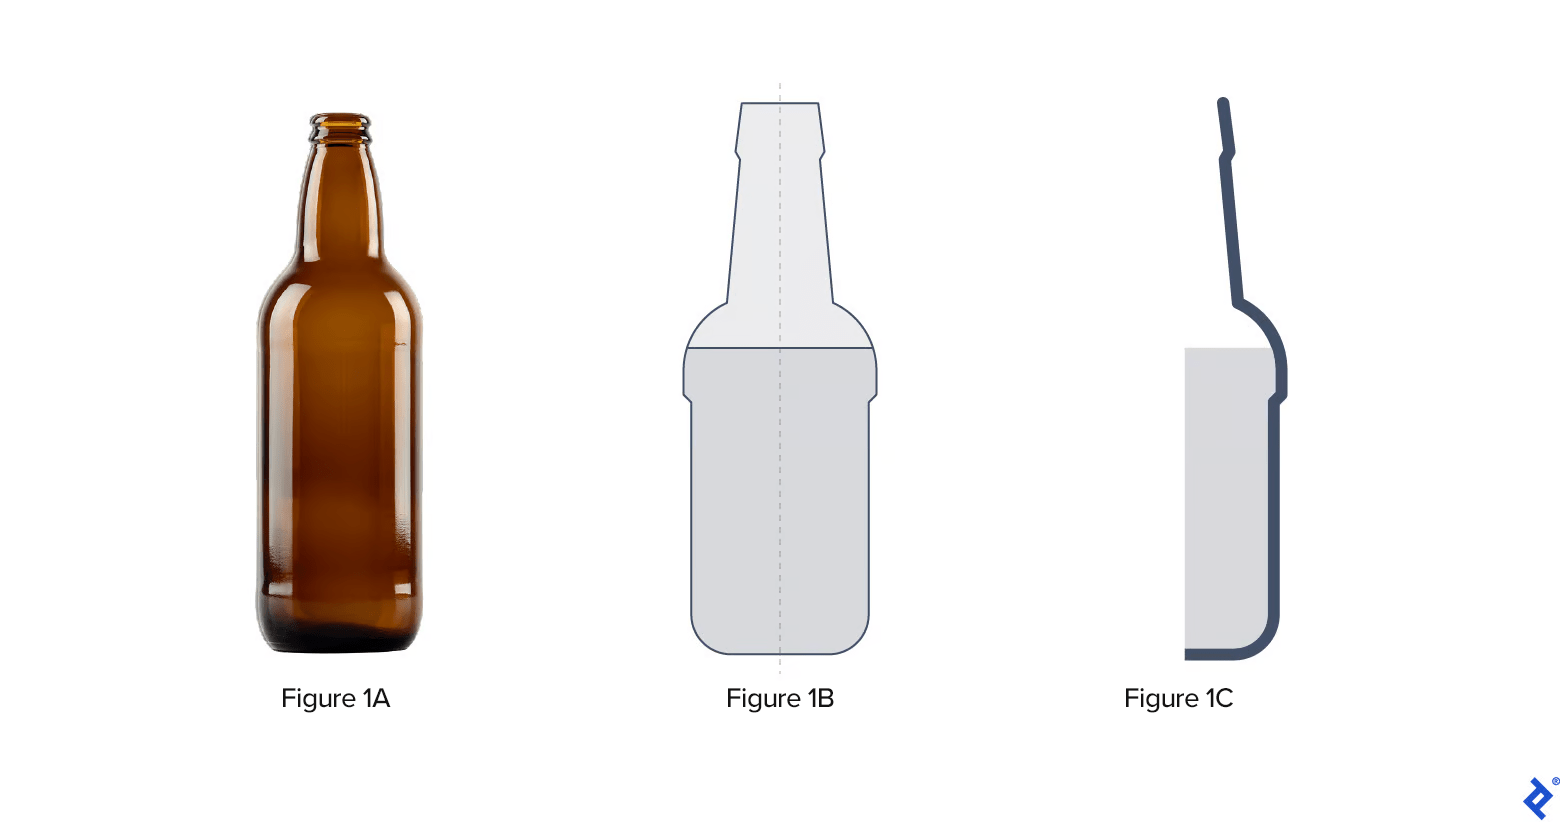 Creating isometric illustrations starts with outlining a reference image and cutting it in half. This tutorial uses a short-necked bottle as an example.